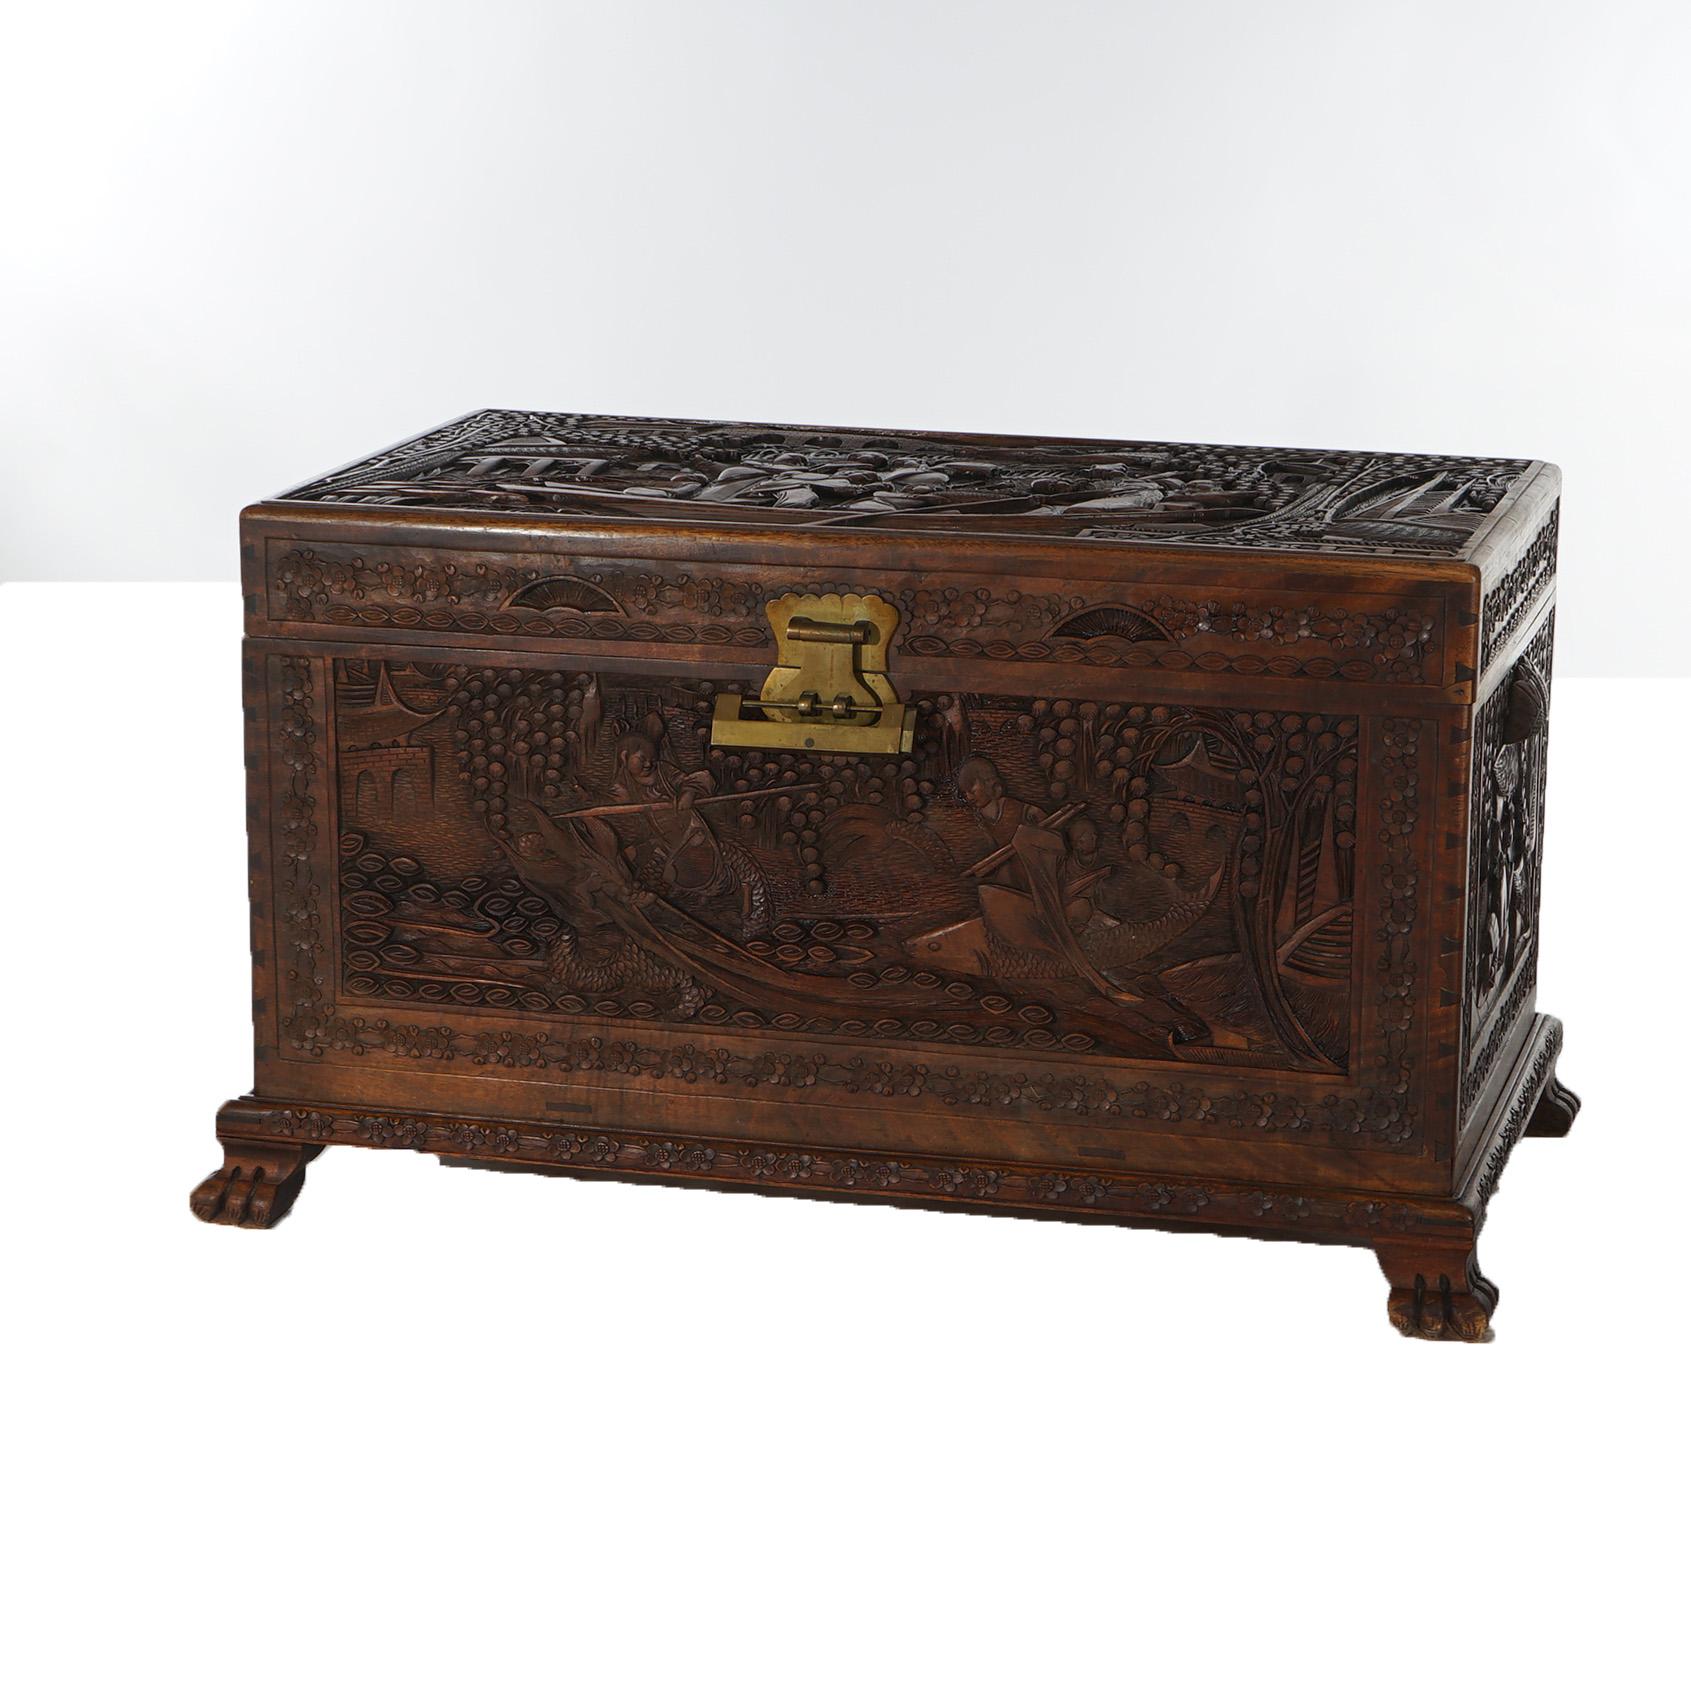 20th Century Antique Chinese Hardwood Carved in Relief Chinoiserie Blanket Chest Chest C1920 For Sale